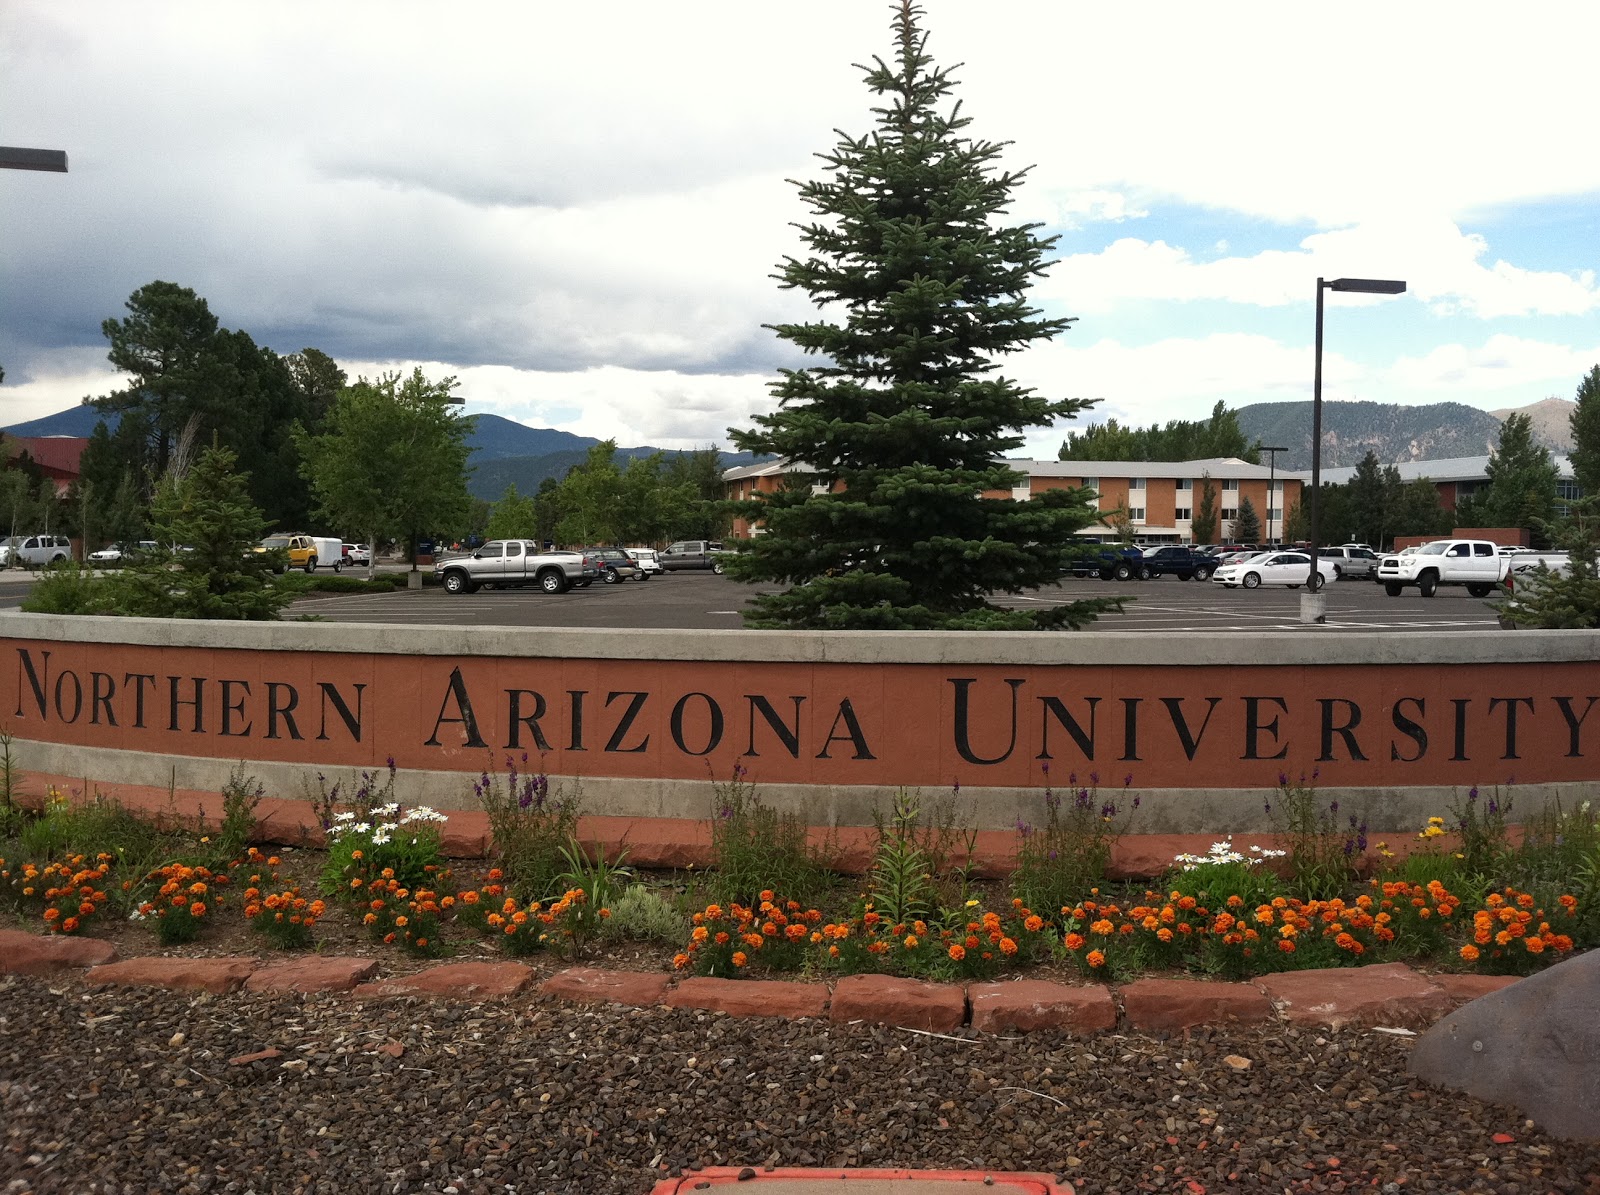 Laura's Miscellaneous Musings A Trip to Northern Arizona University